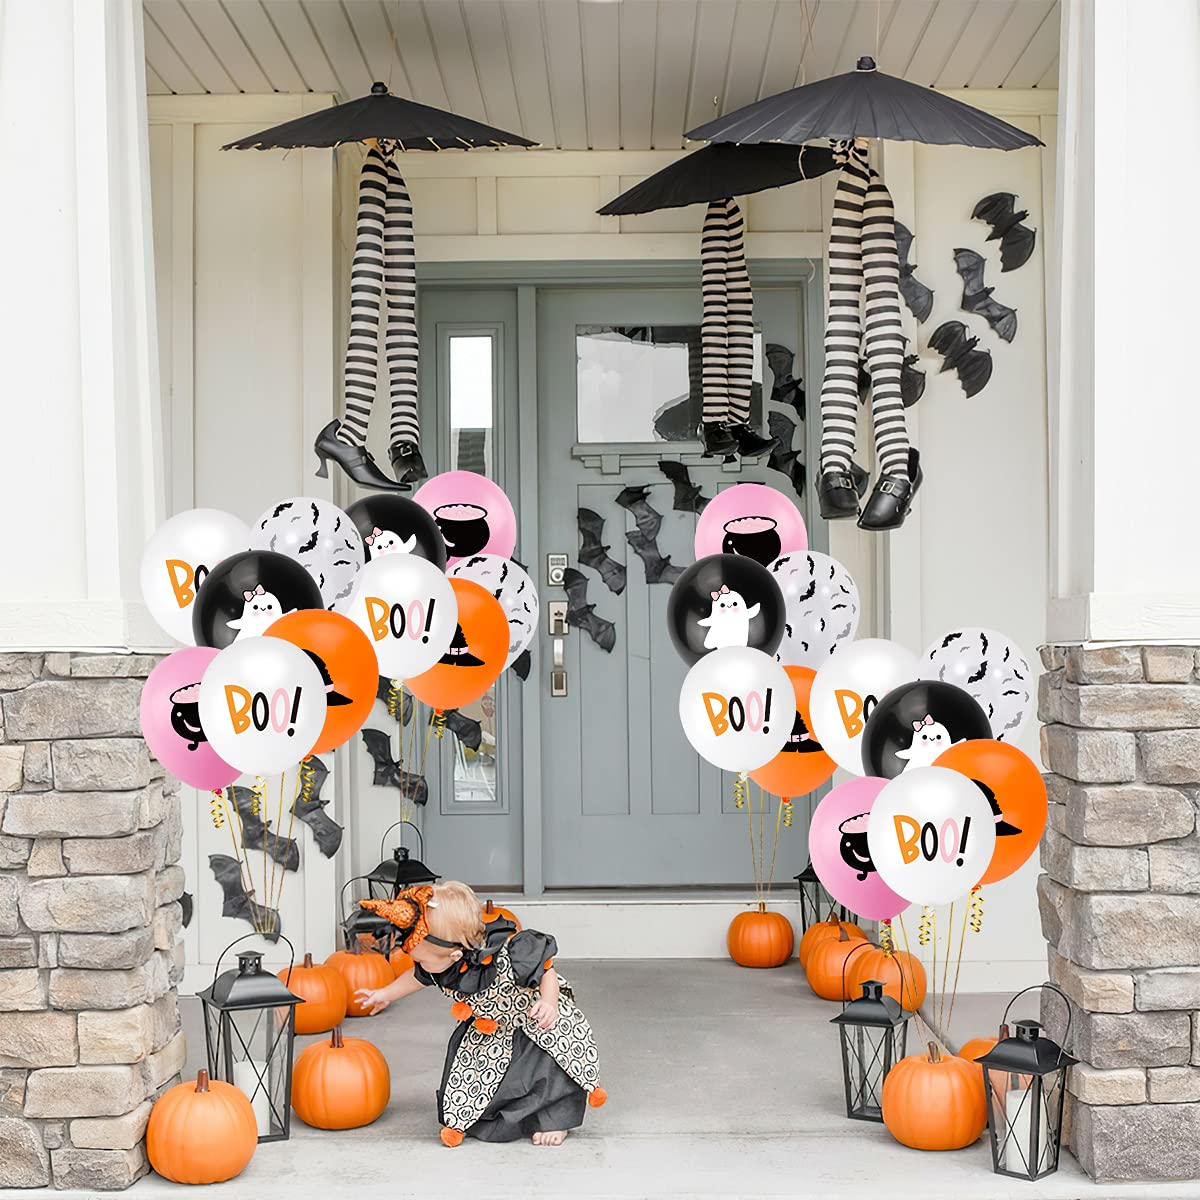 50Pcs Halloween Balloons, Halloween Pink Orange Black White Latex Balloons with Cute Ghost,Wizard hat,Black Bat Design for Halloween Party Favors,Little Boo Baby Shower,Halloween Birthday Party Decor